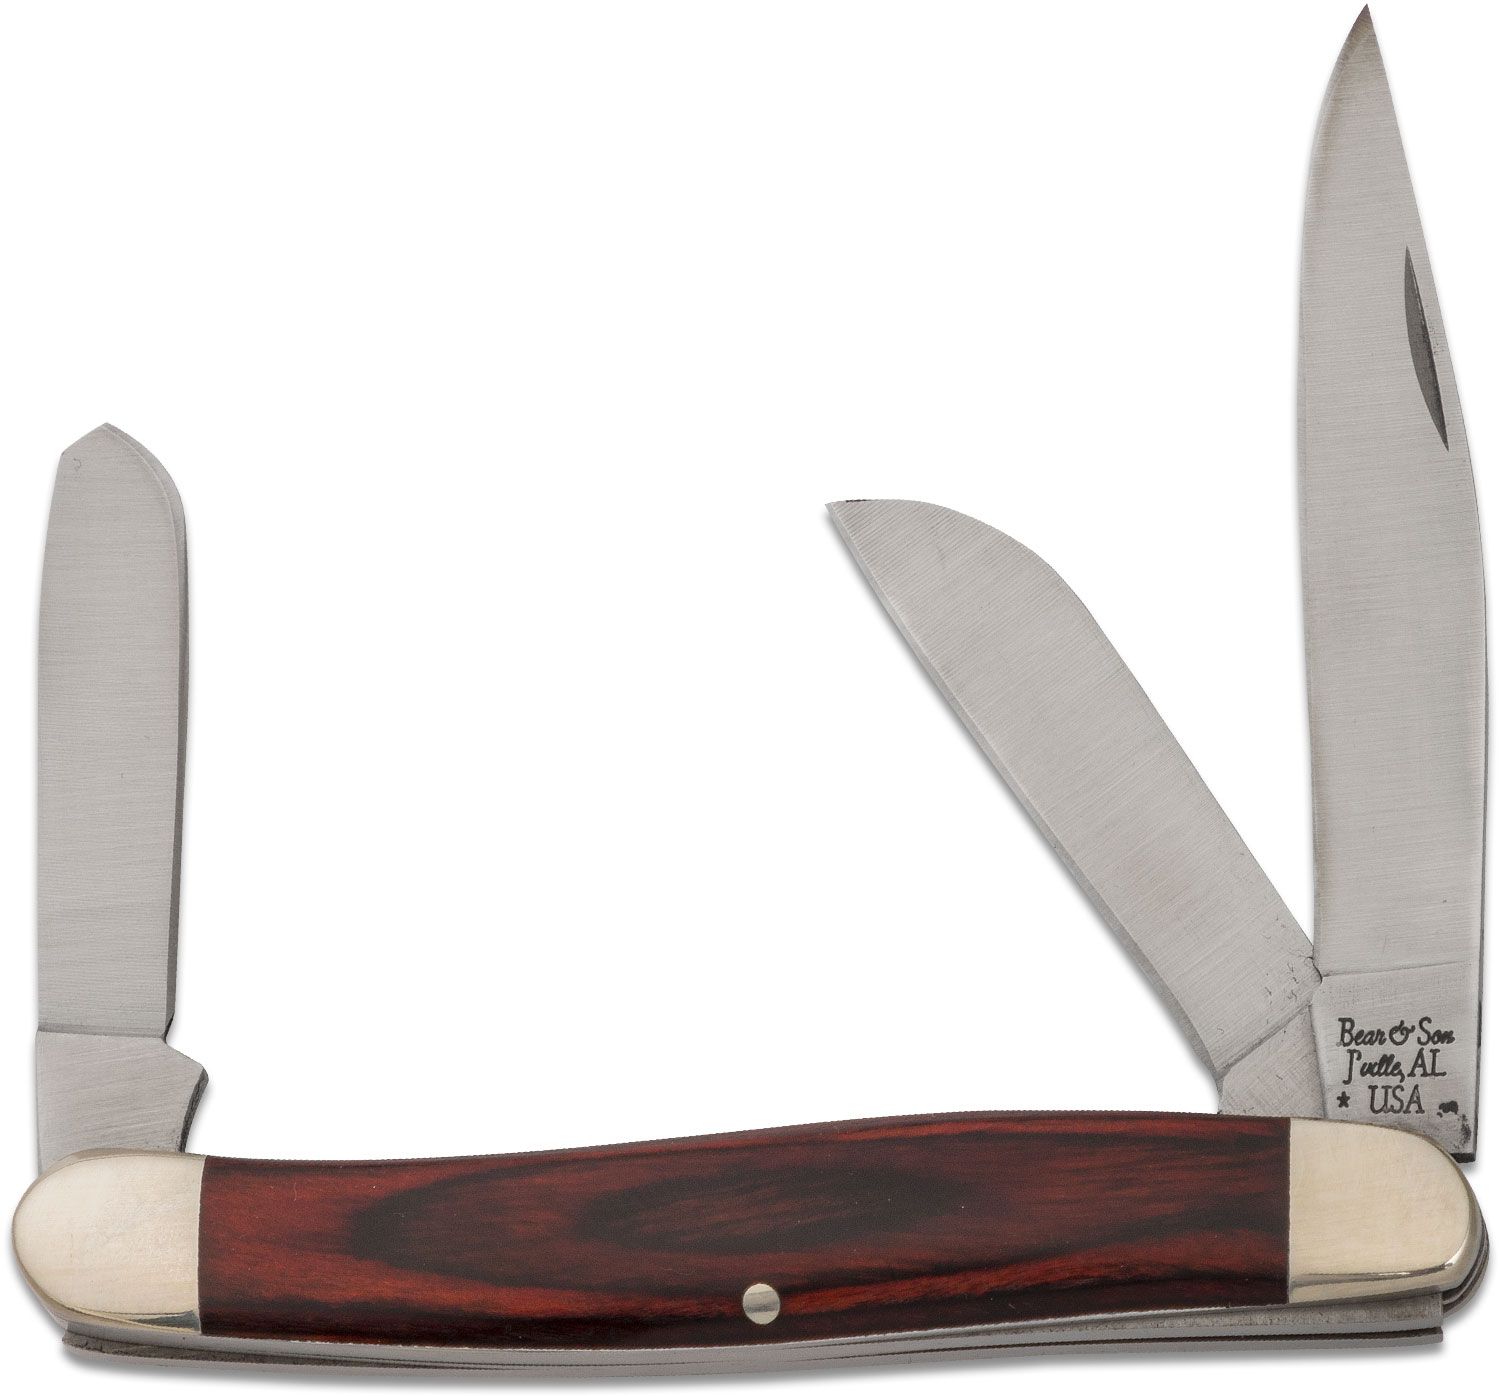 Bear & Son Large Stockman Knife w/ 3 Blades & Rosewood Handle - 4.0 Closed  - KnifeCenter - 247R